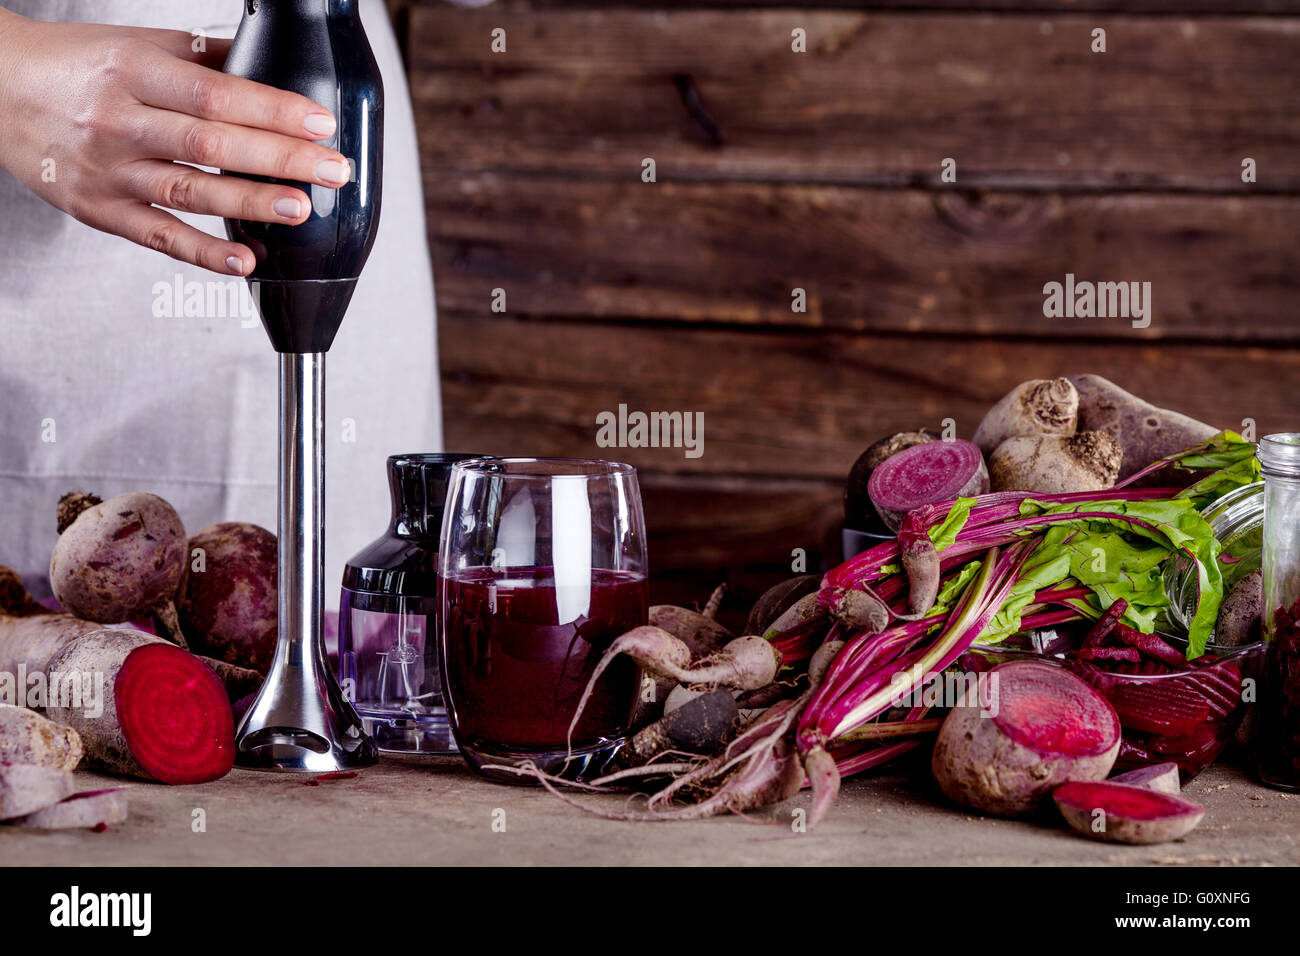 Cook is making a beetroot juice with blender Stock Photo